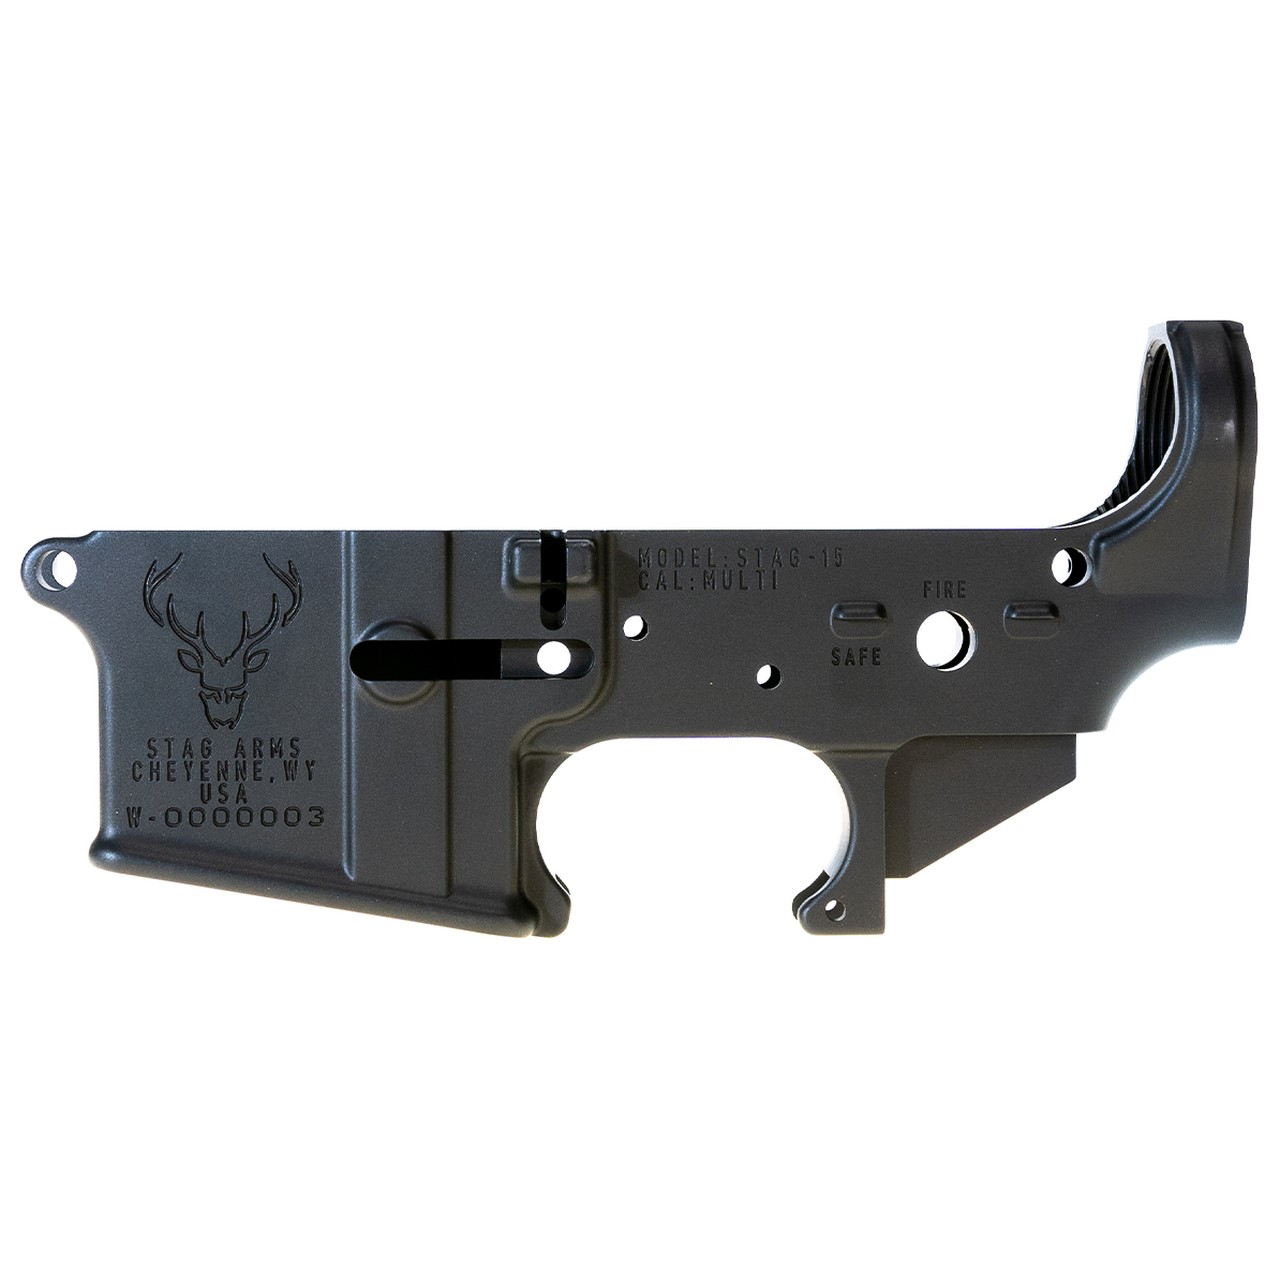 STAG ARMS RECEIVER, LOWER, BLUE, BLEMISHED